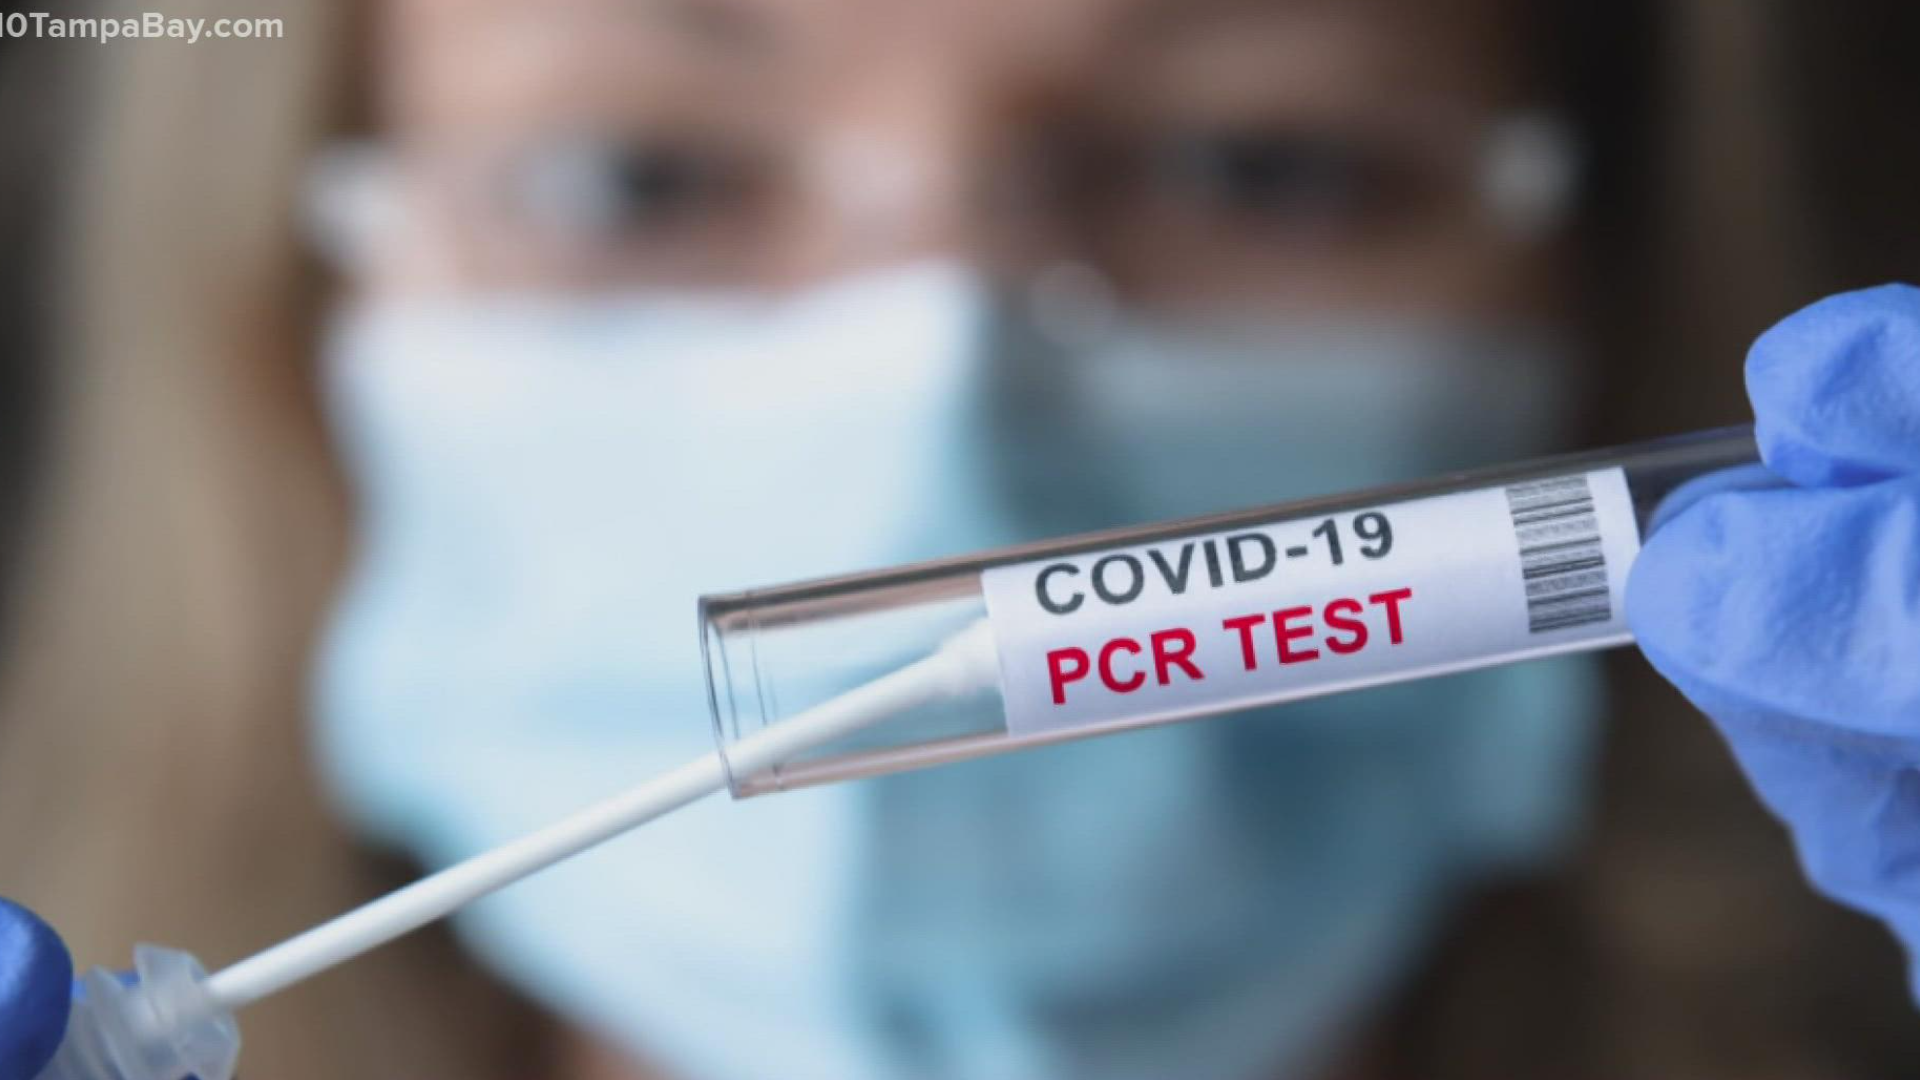 The specific PCR test was designed solely to detect COVID-19 so the CDC wants labs to use tests that check for both SARS-CoV-2 and influenza.